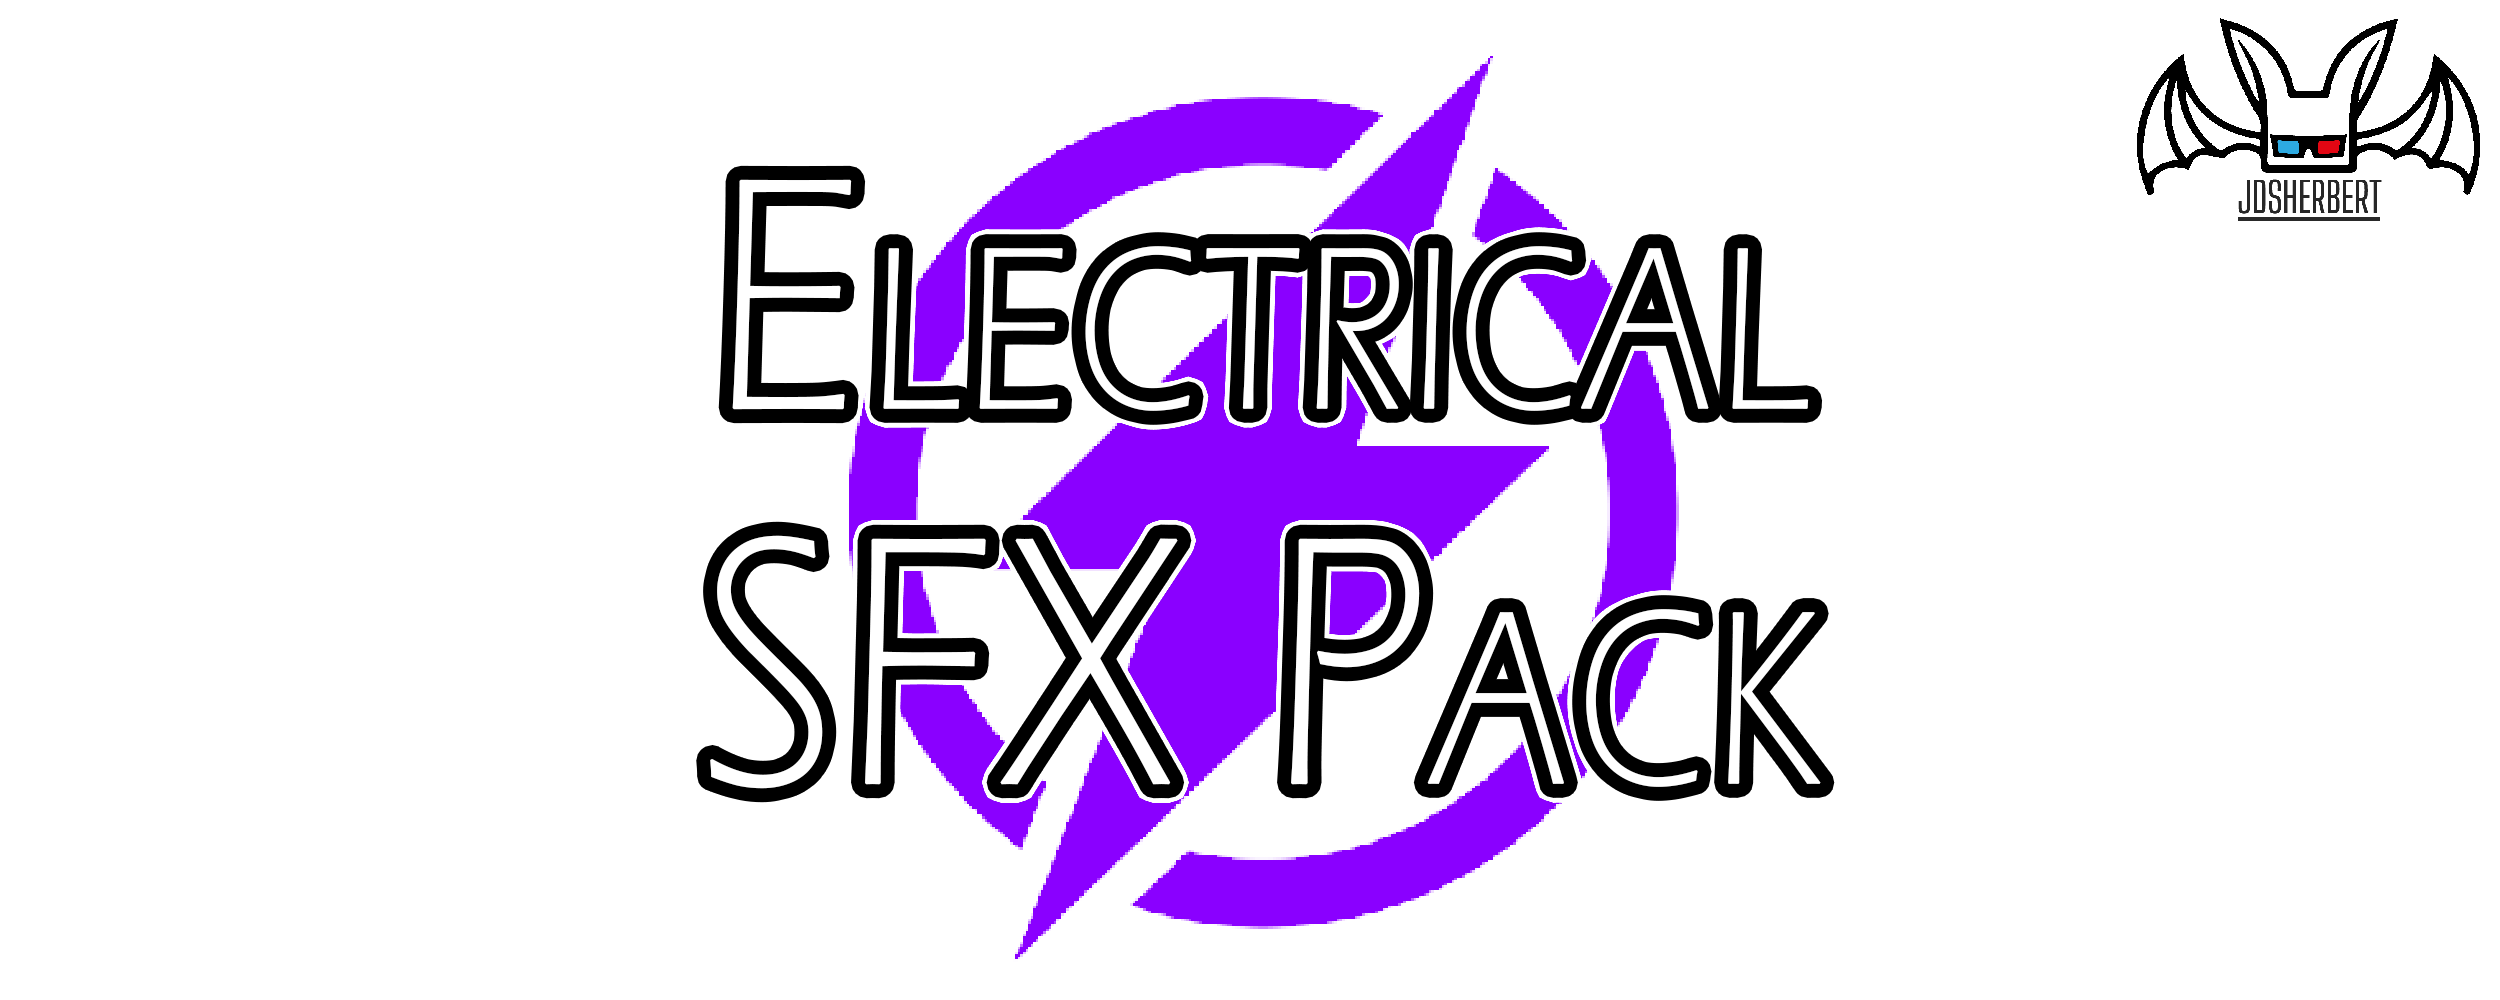 Electrical SFX Pack